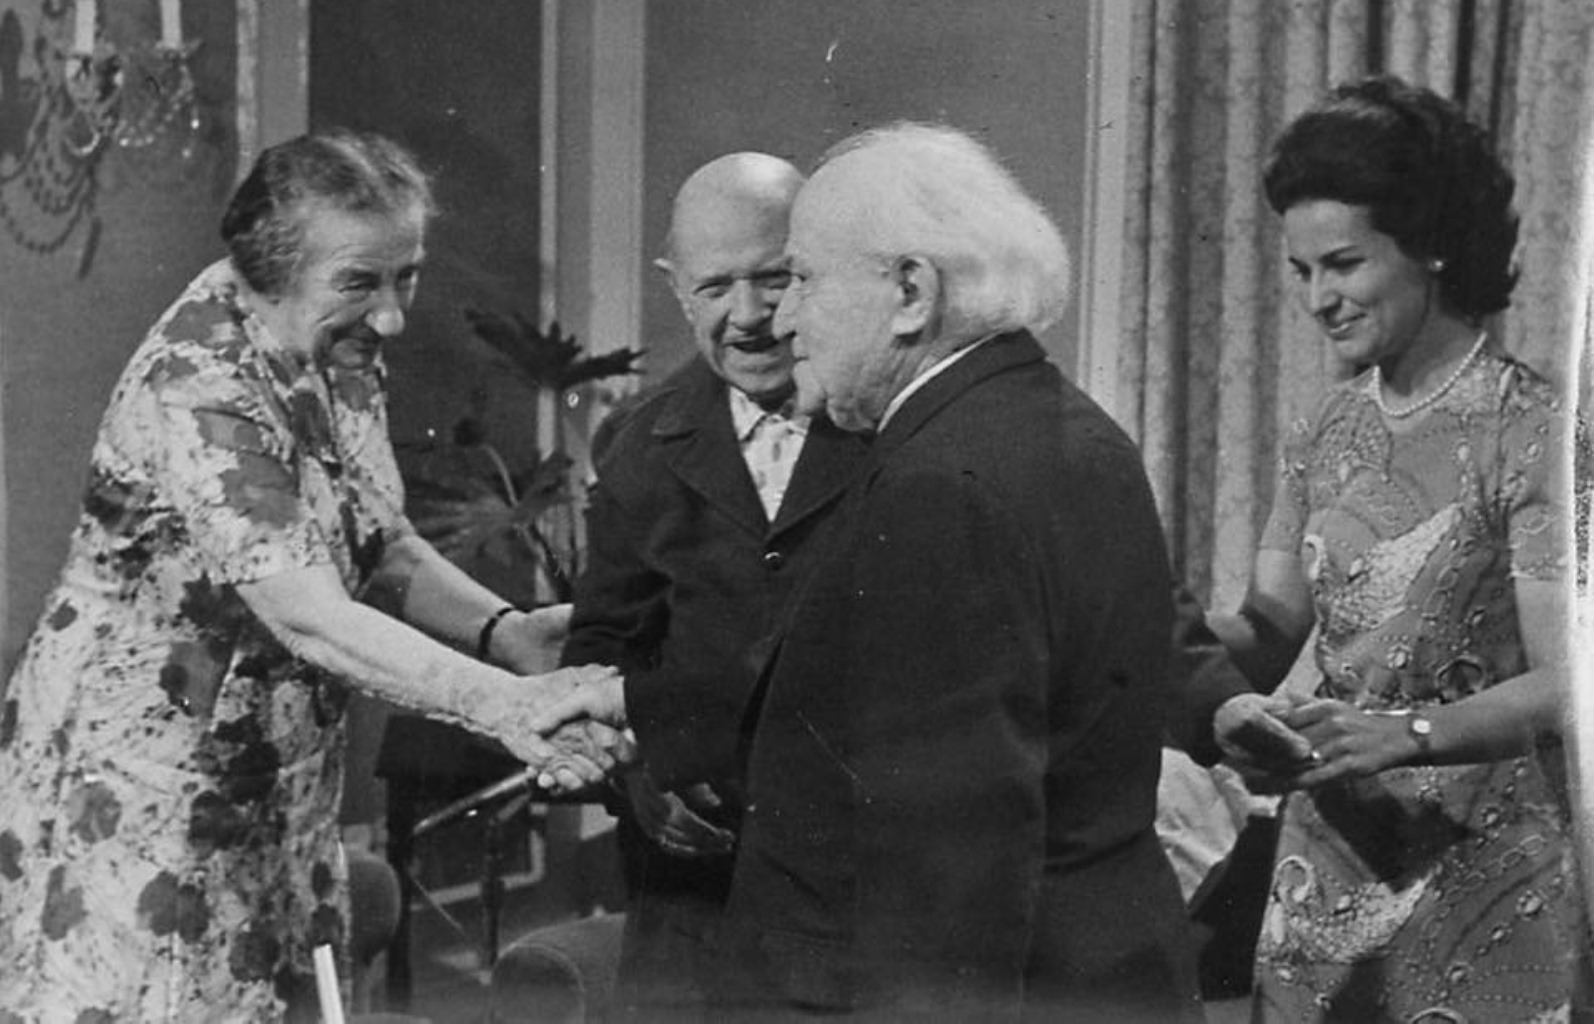 Pablo and Marta Casals in Israel in 1973 with Golda Meir and David Ben-Gurion. Photo courtesy of Amit Peled